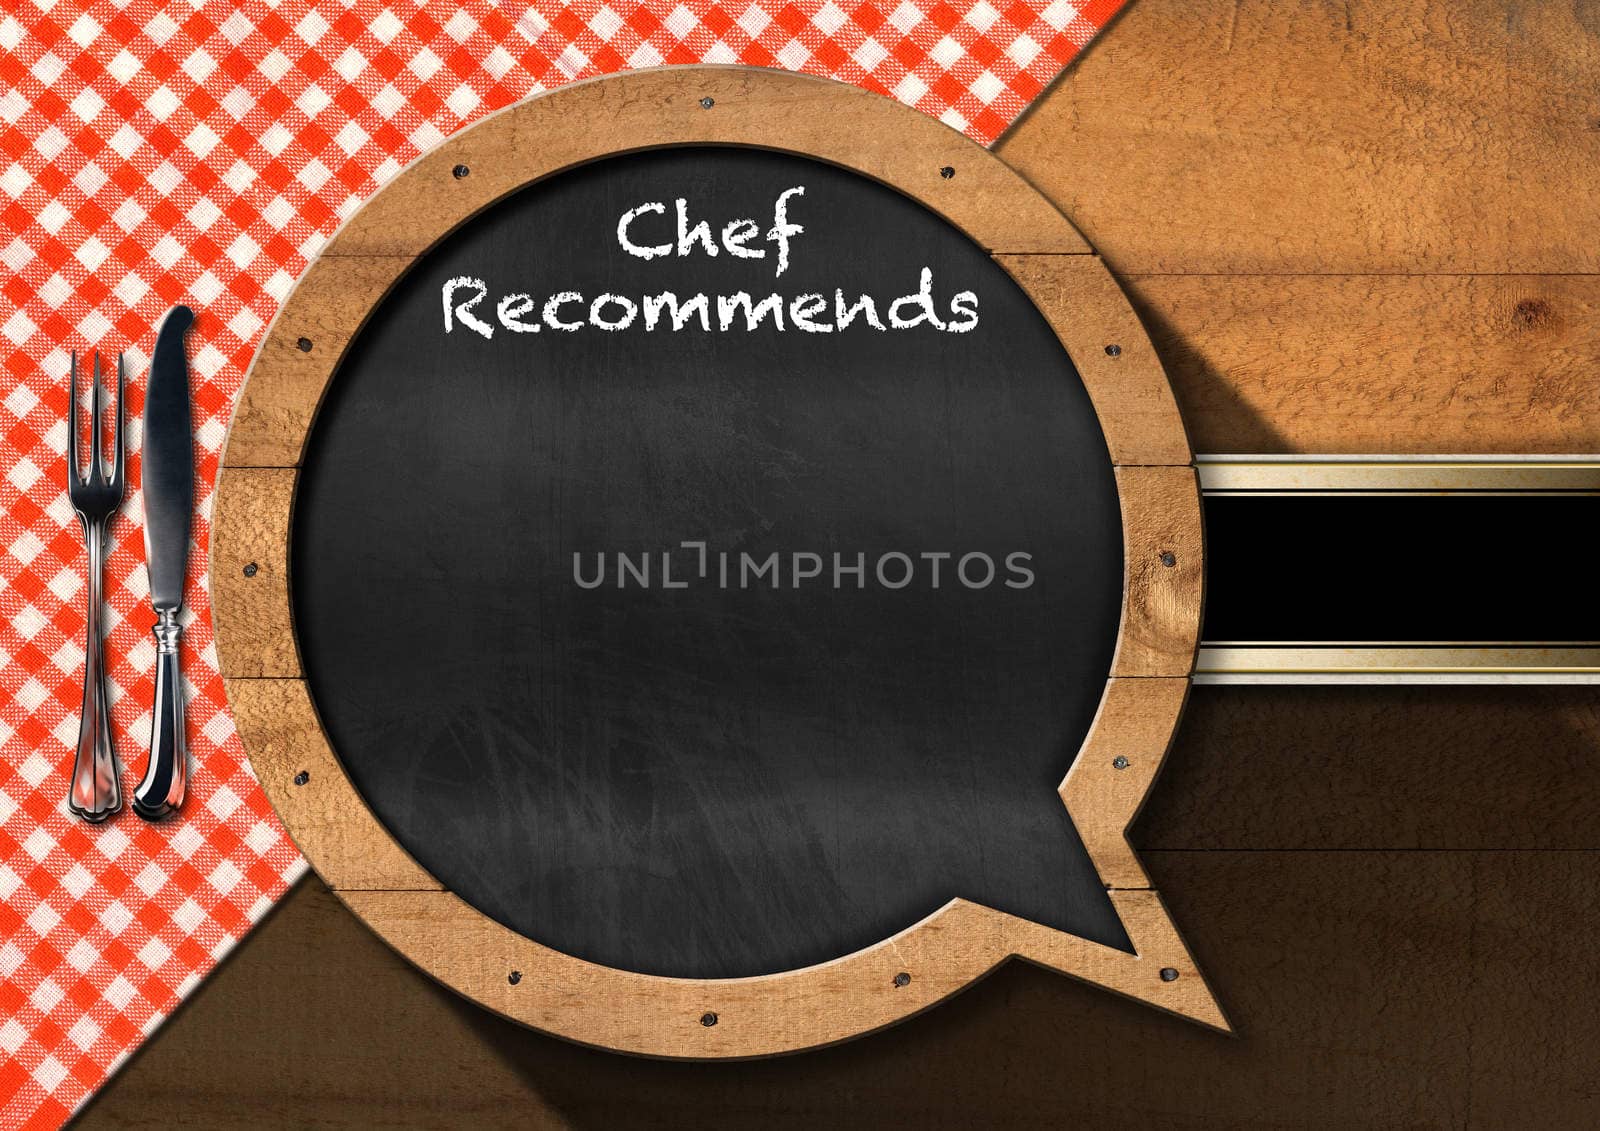 Chef Recommends - Blackboard Speech Bubble Shaped by catalby